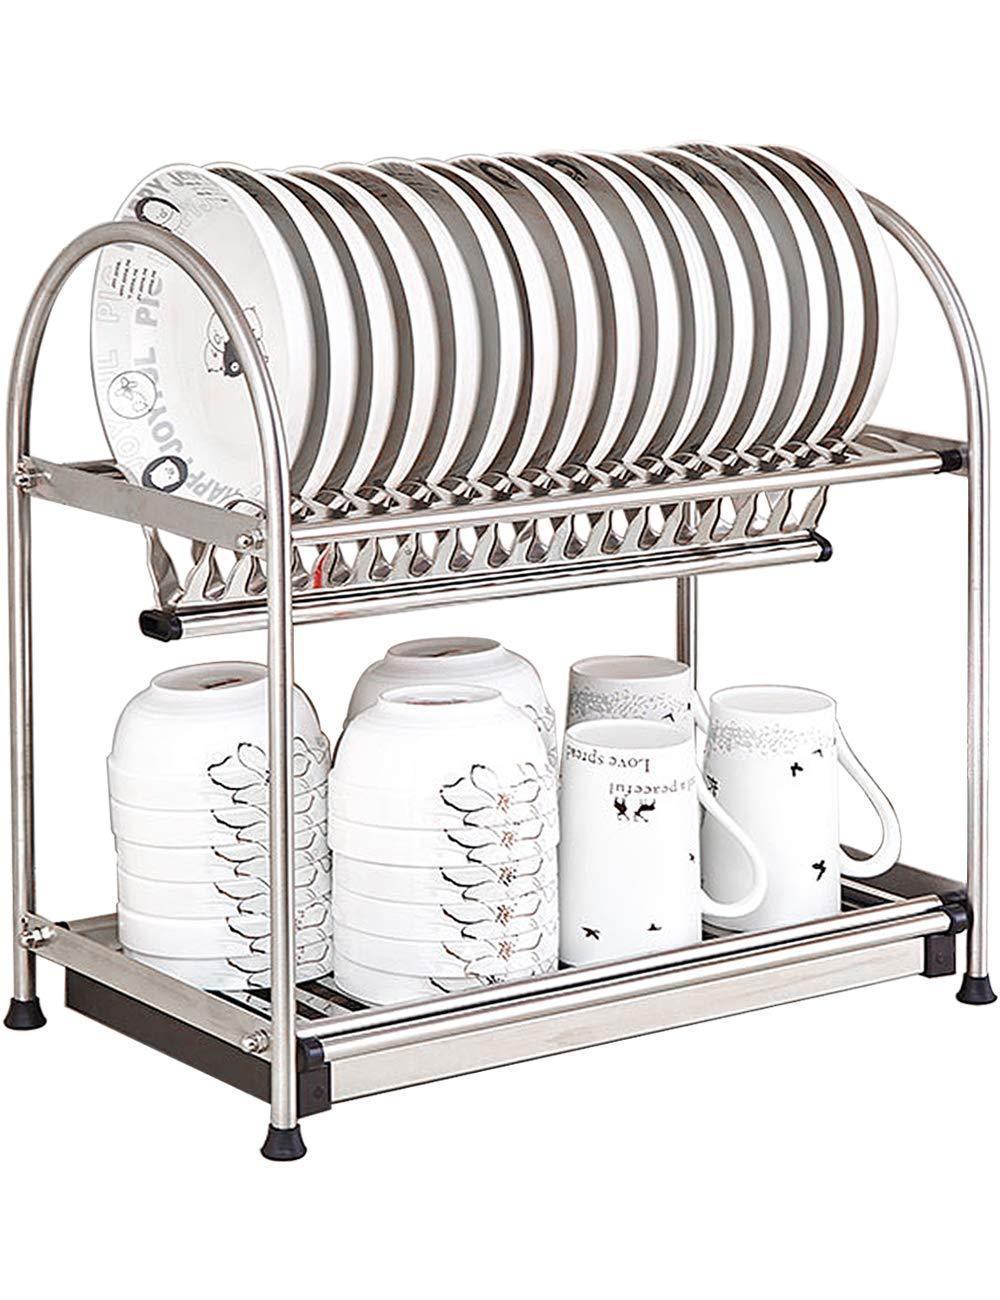 Kitchen Hardware Collection 2 Tier Dish Drying Rack Stainless Steel Stand On Countertop Draining Rack 17.9 Inch Length 16 Dish Slots Organizer with Drainboard for Cup Plate Bowl